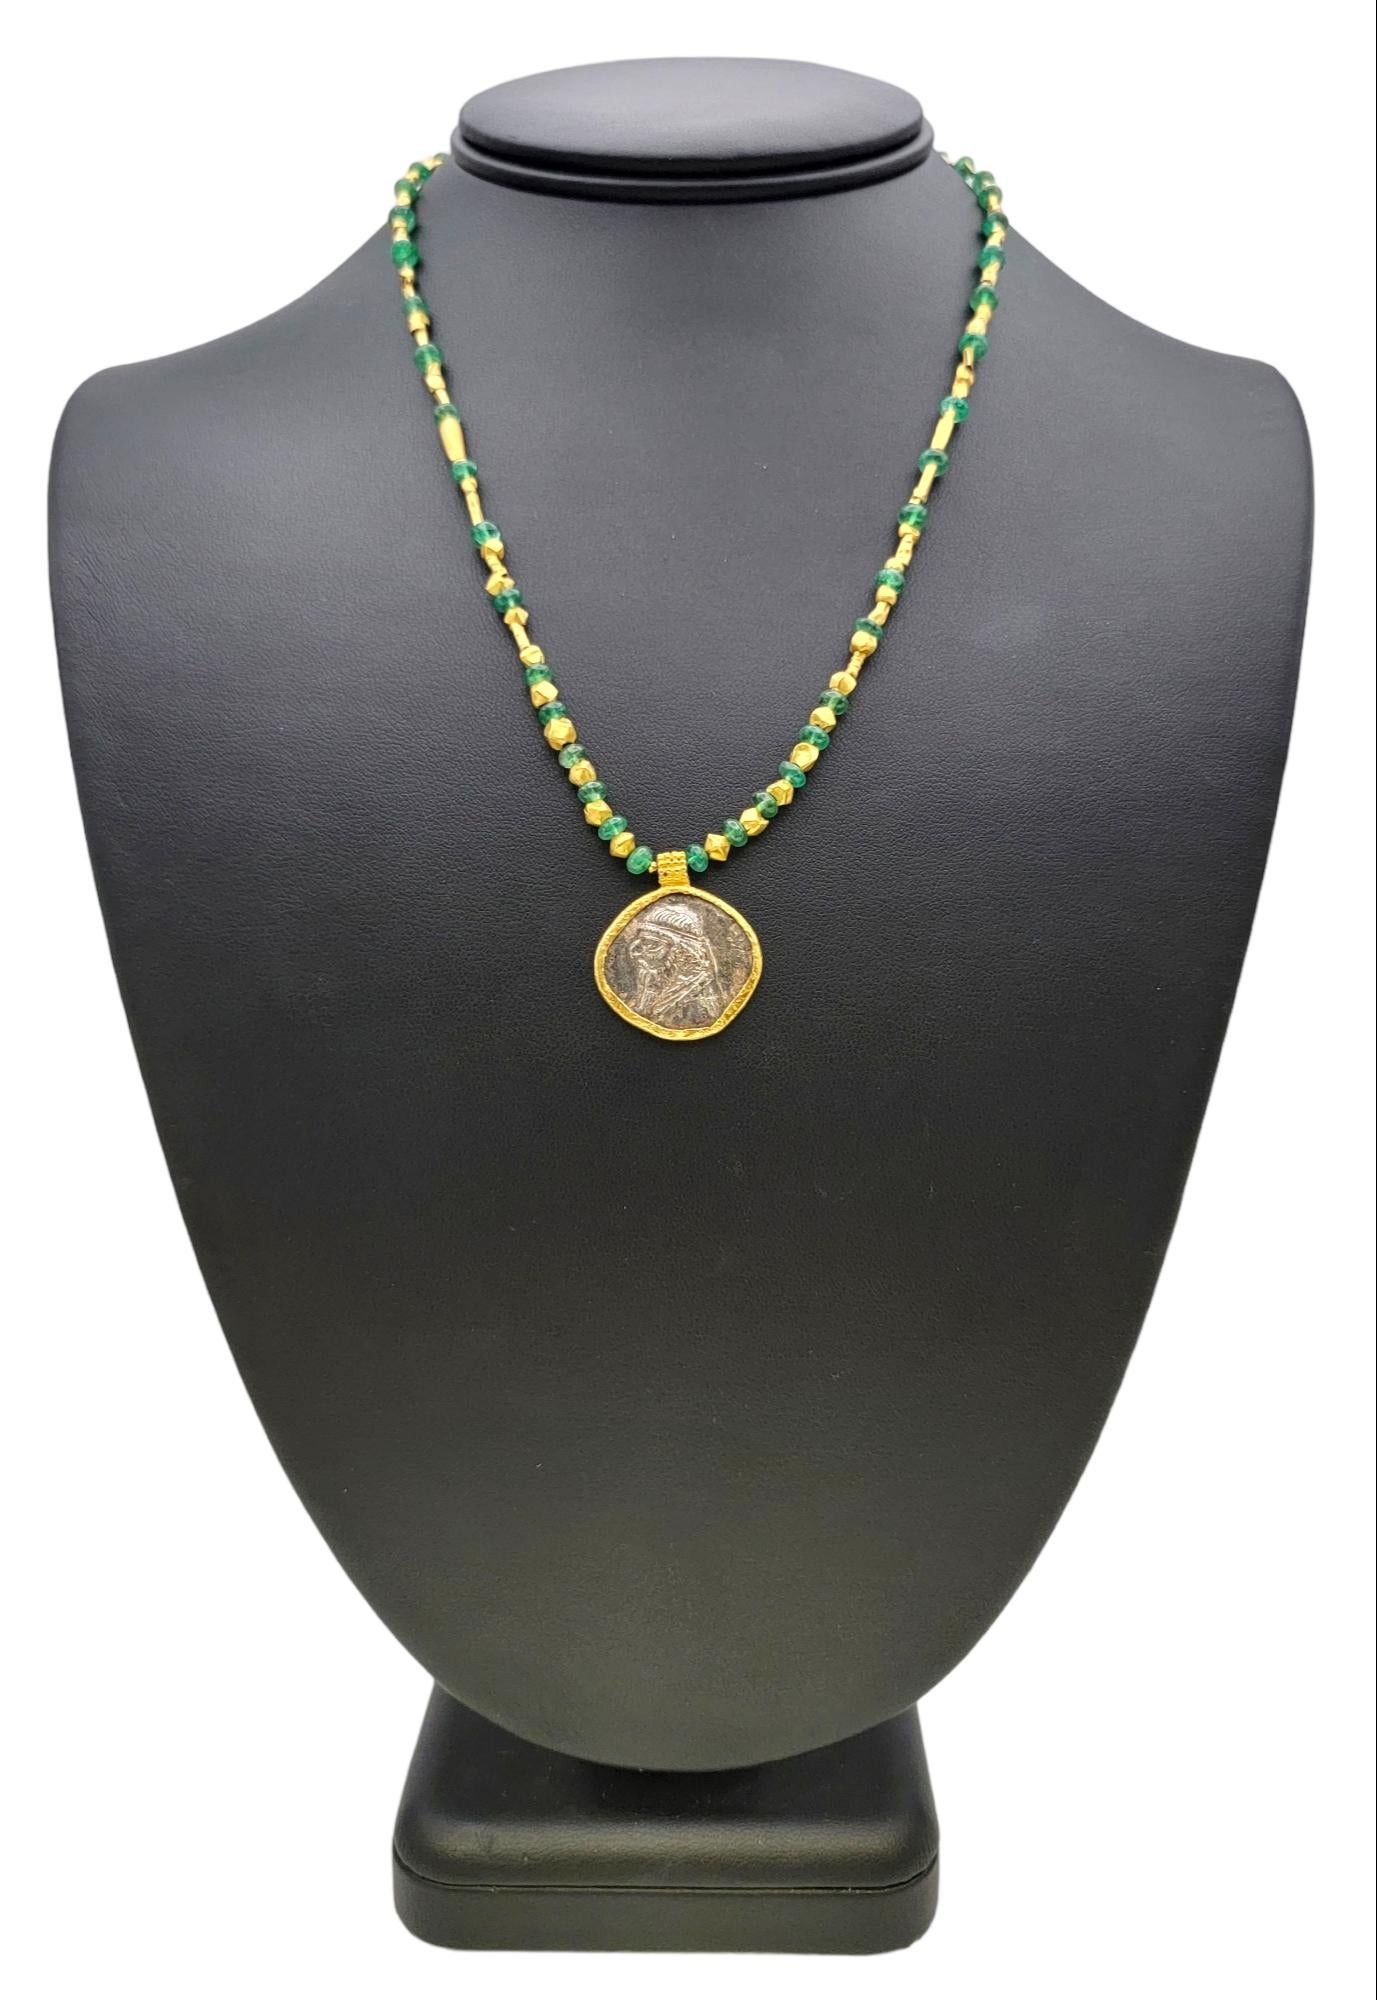 Tetradrachm of Mithridates II Silver Coin Pendant and Emerald Necklace 22 Karat For Sale 6